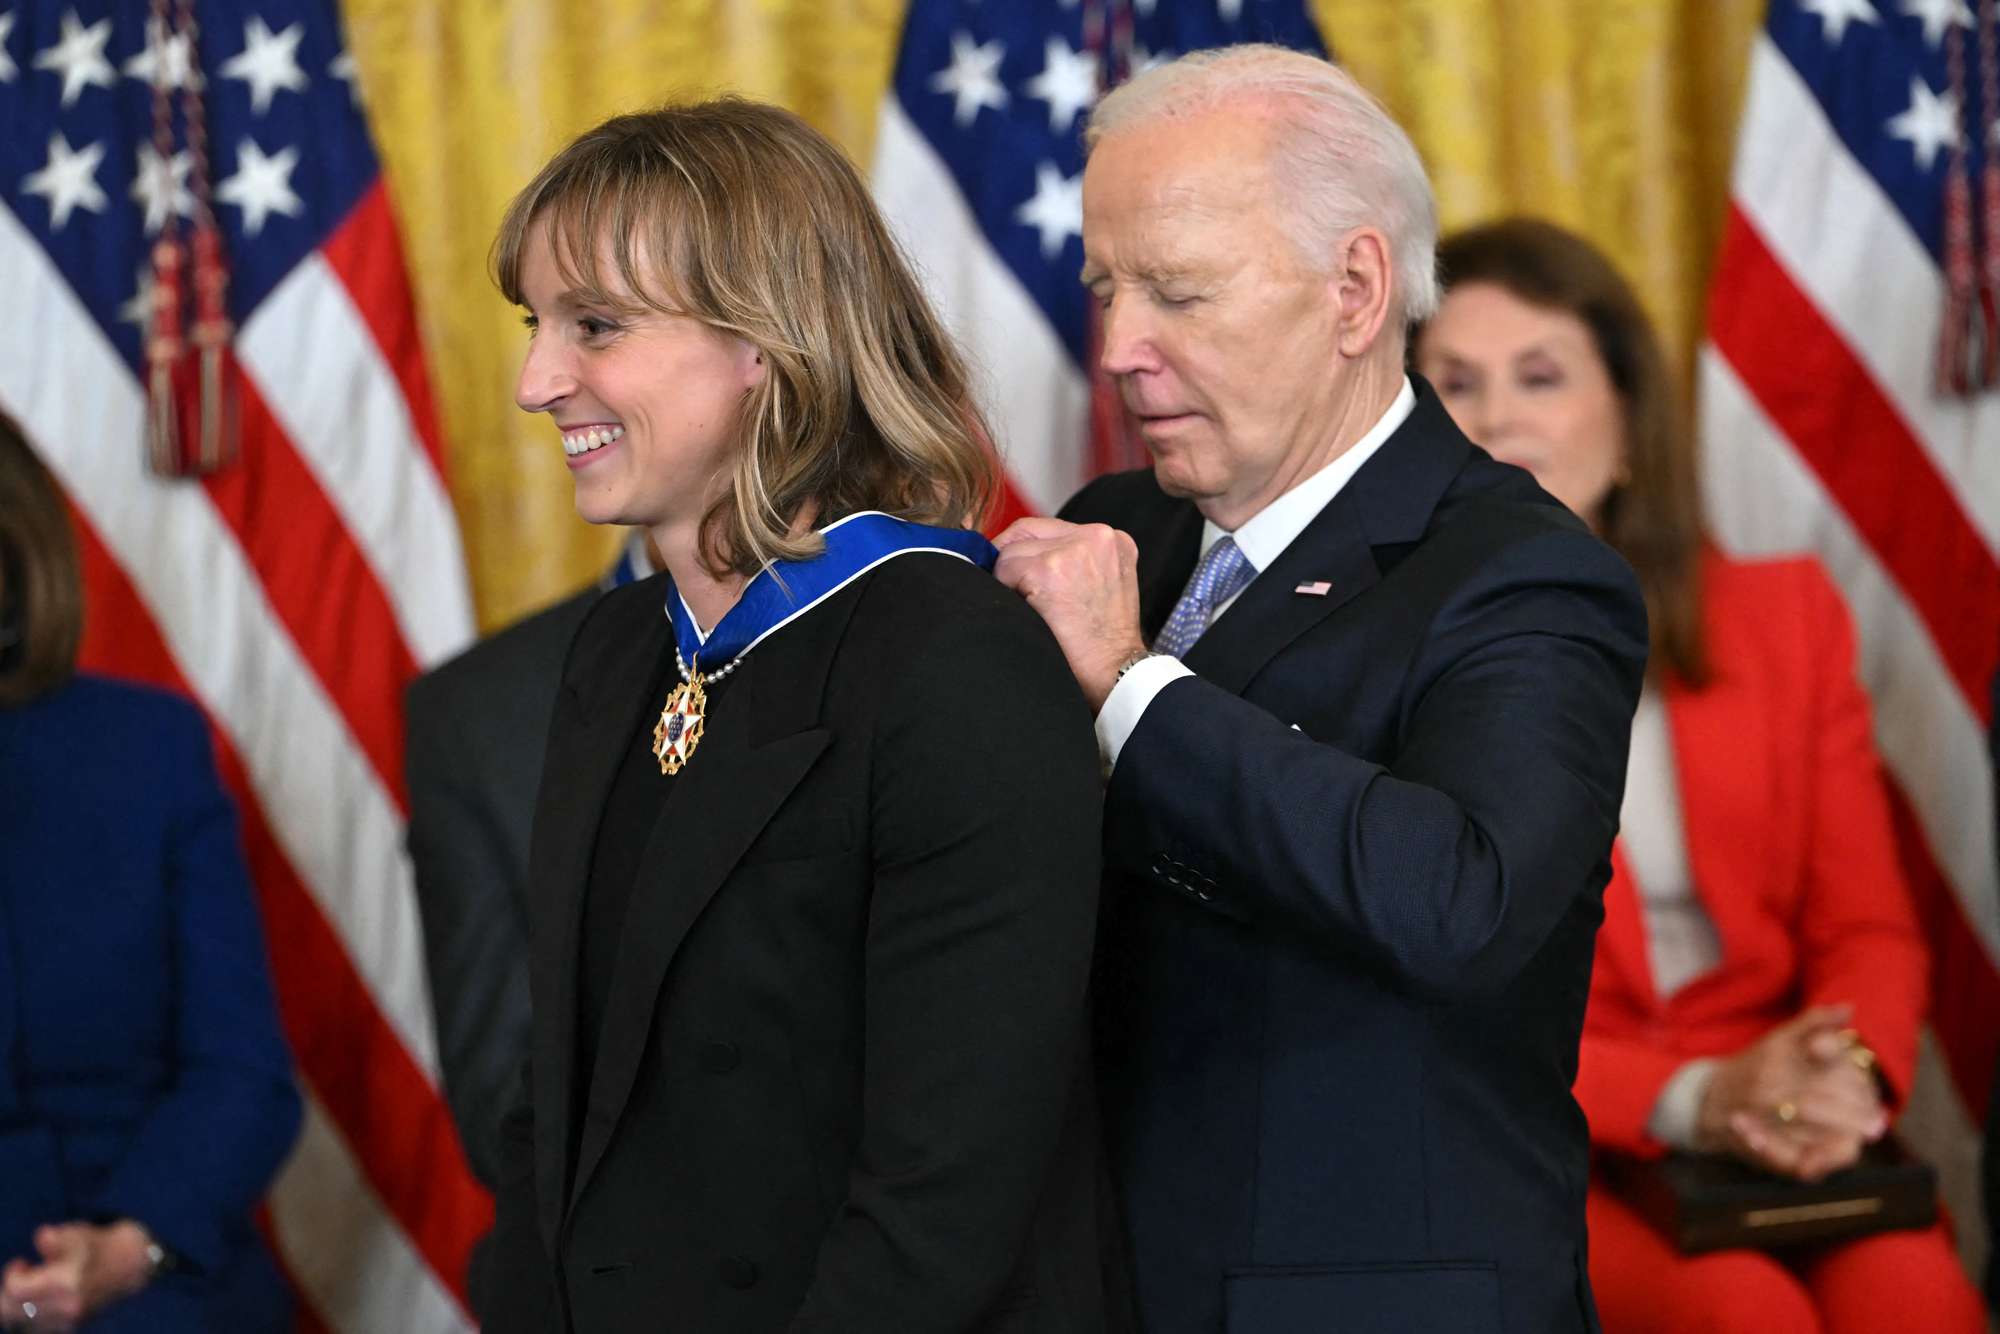 7-Time Olympic Gold Medalist Katie Ledecky Receives Presidential Medal of Freedom